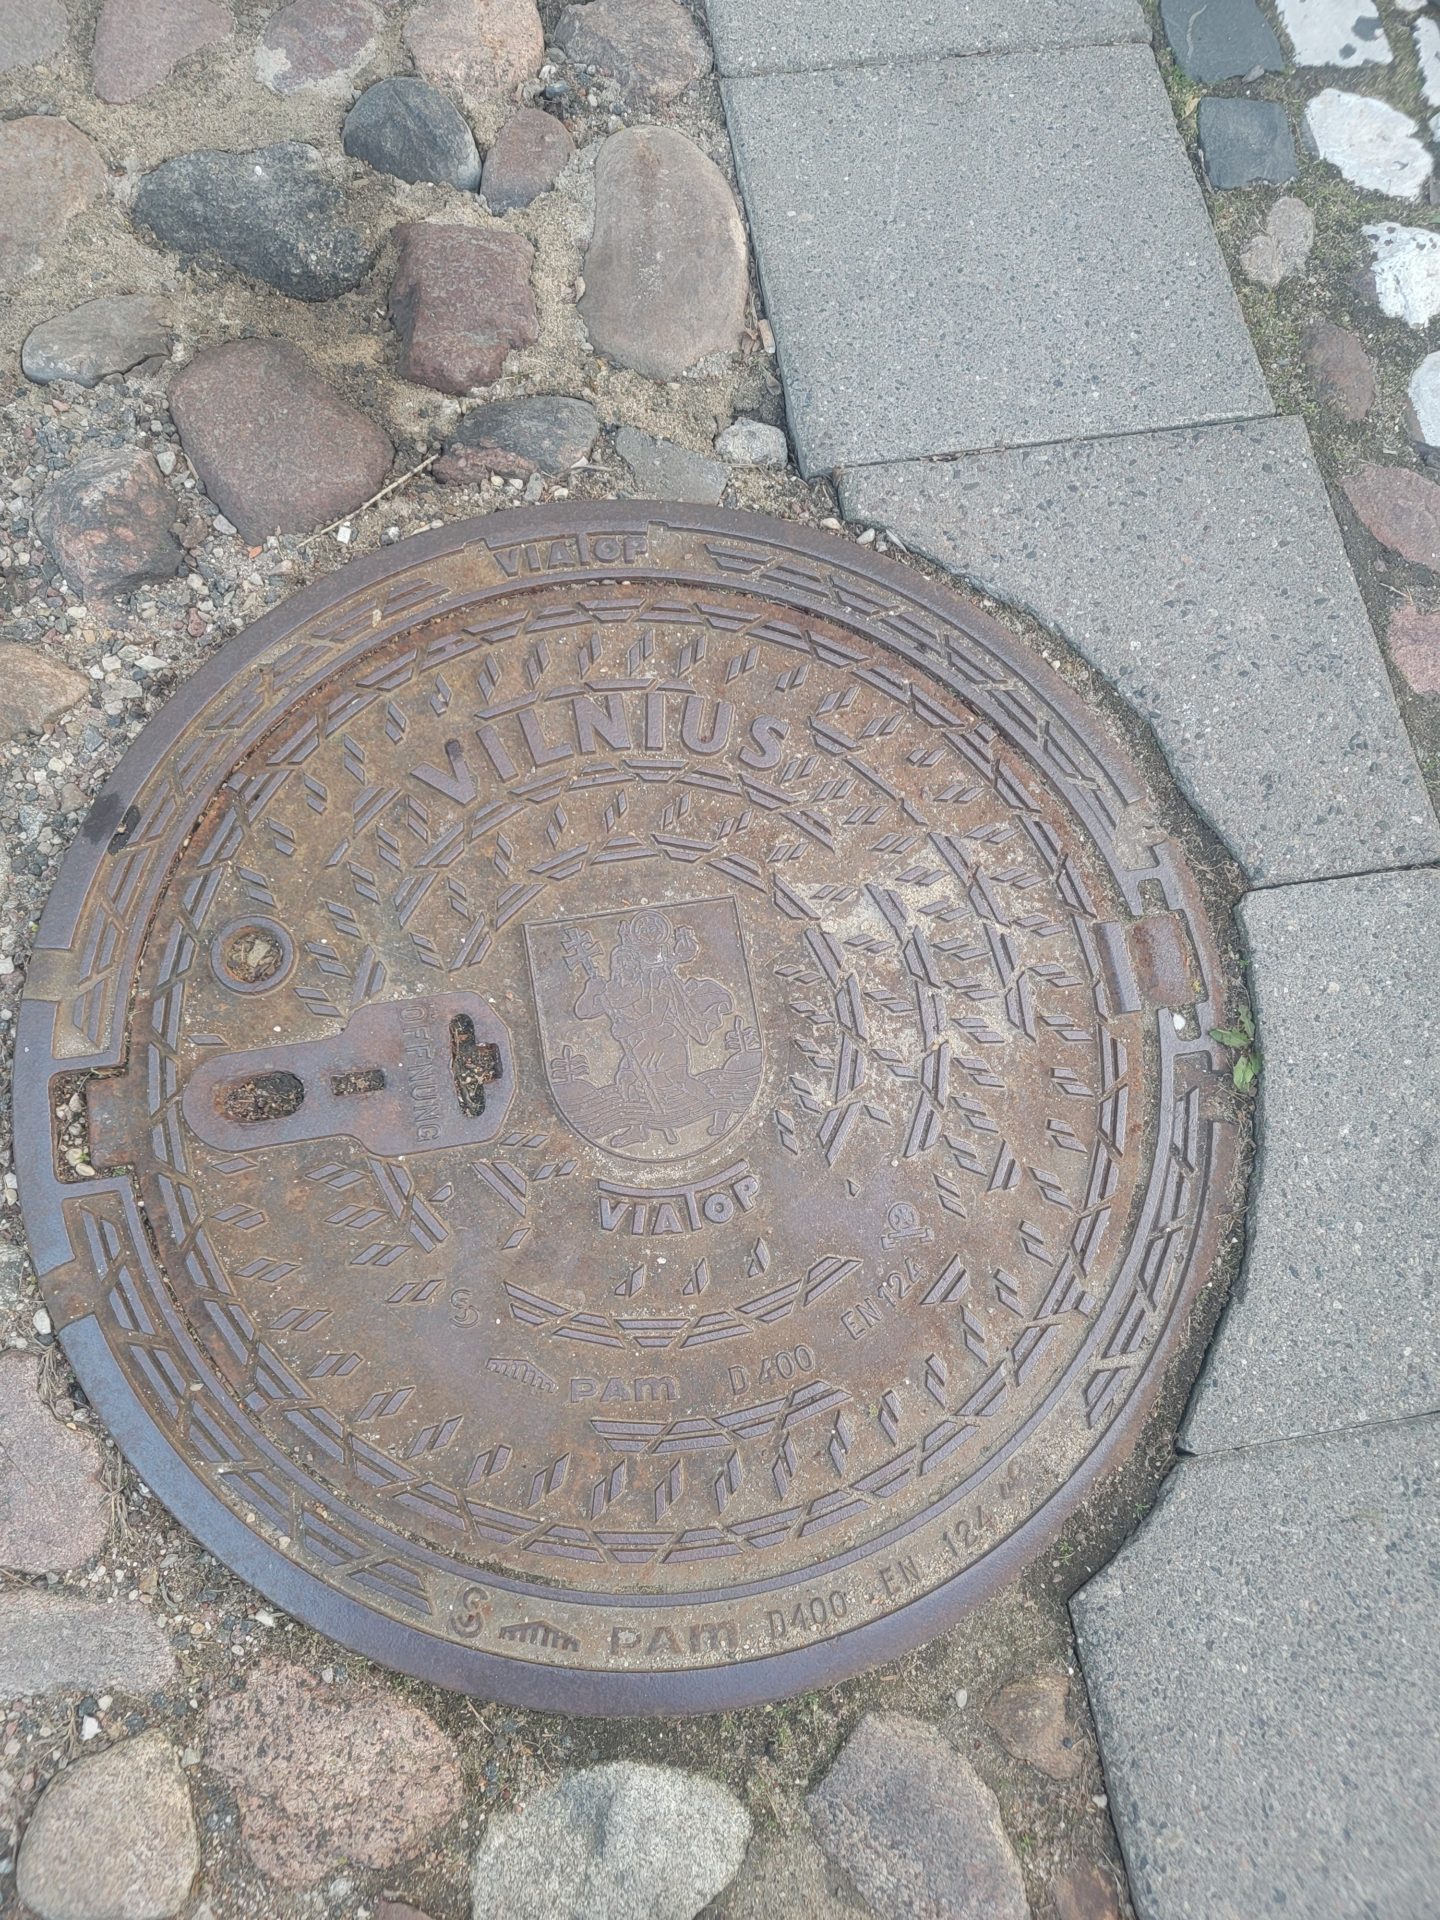 a manhole cover on the ground